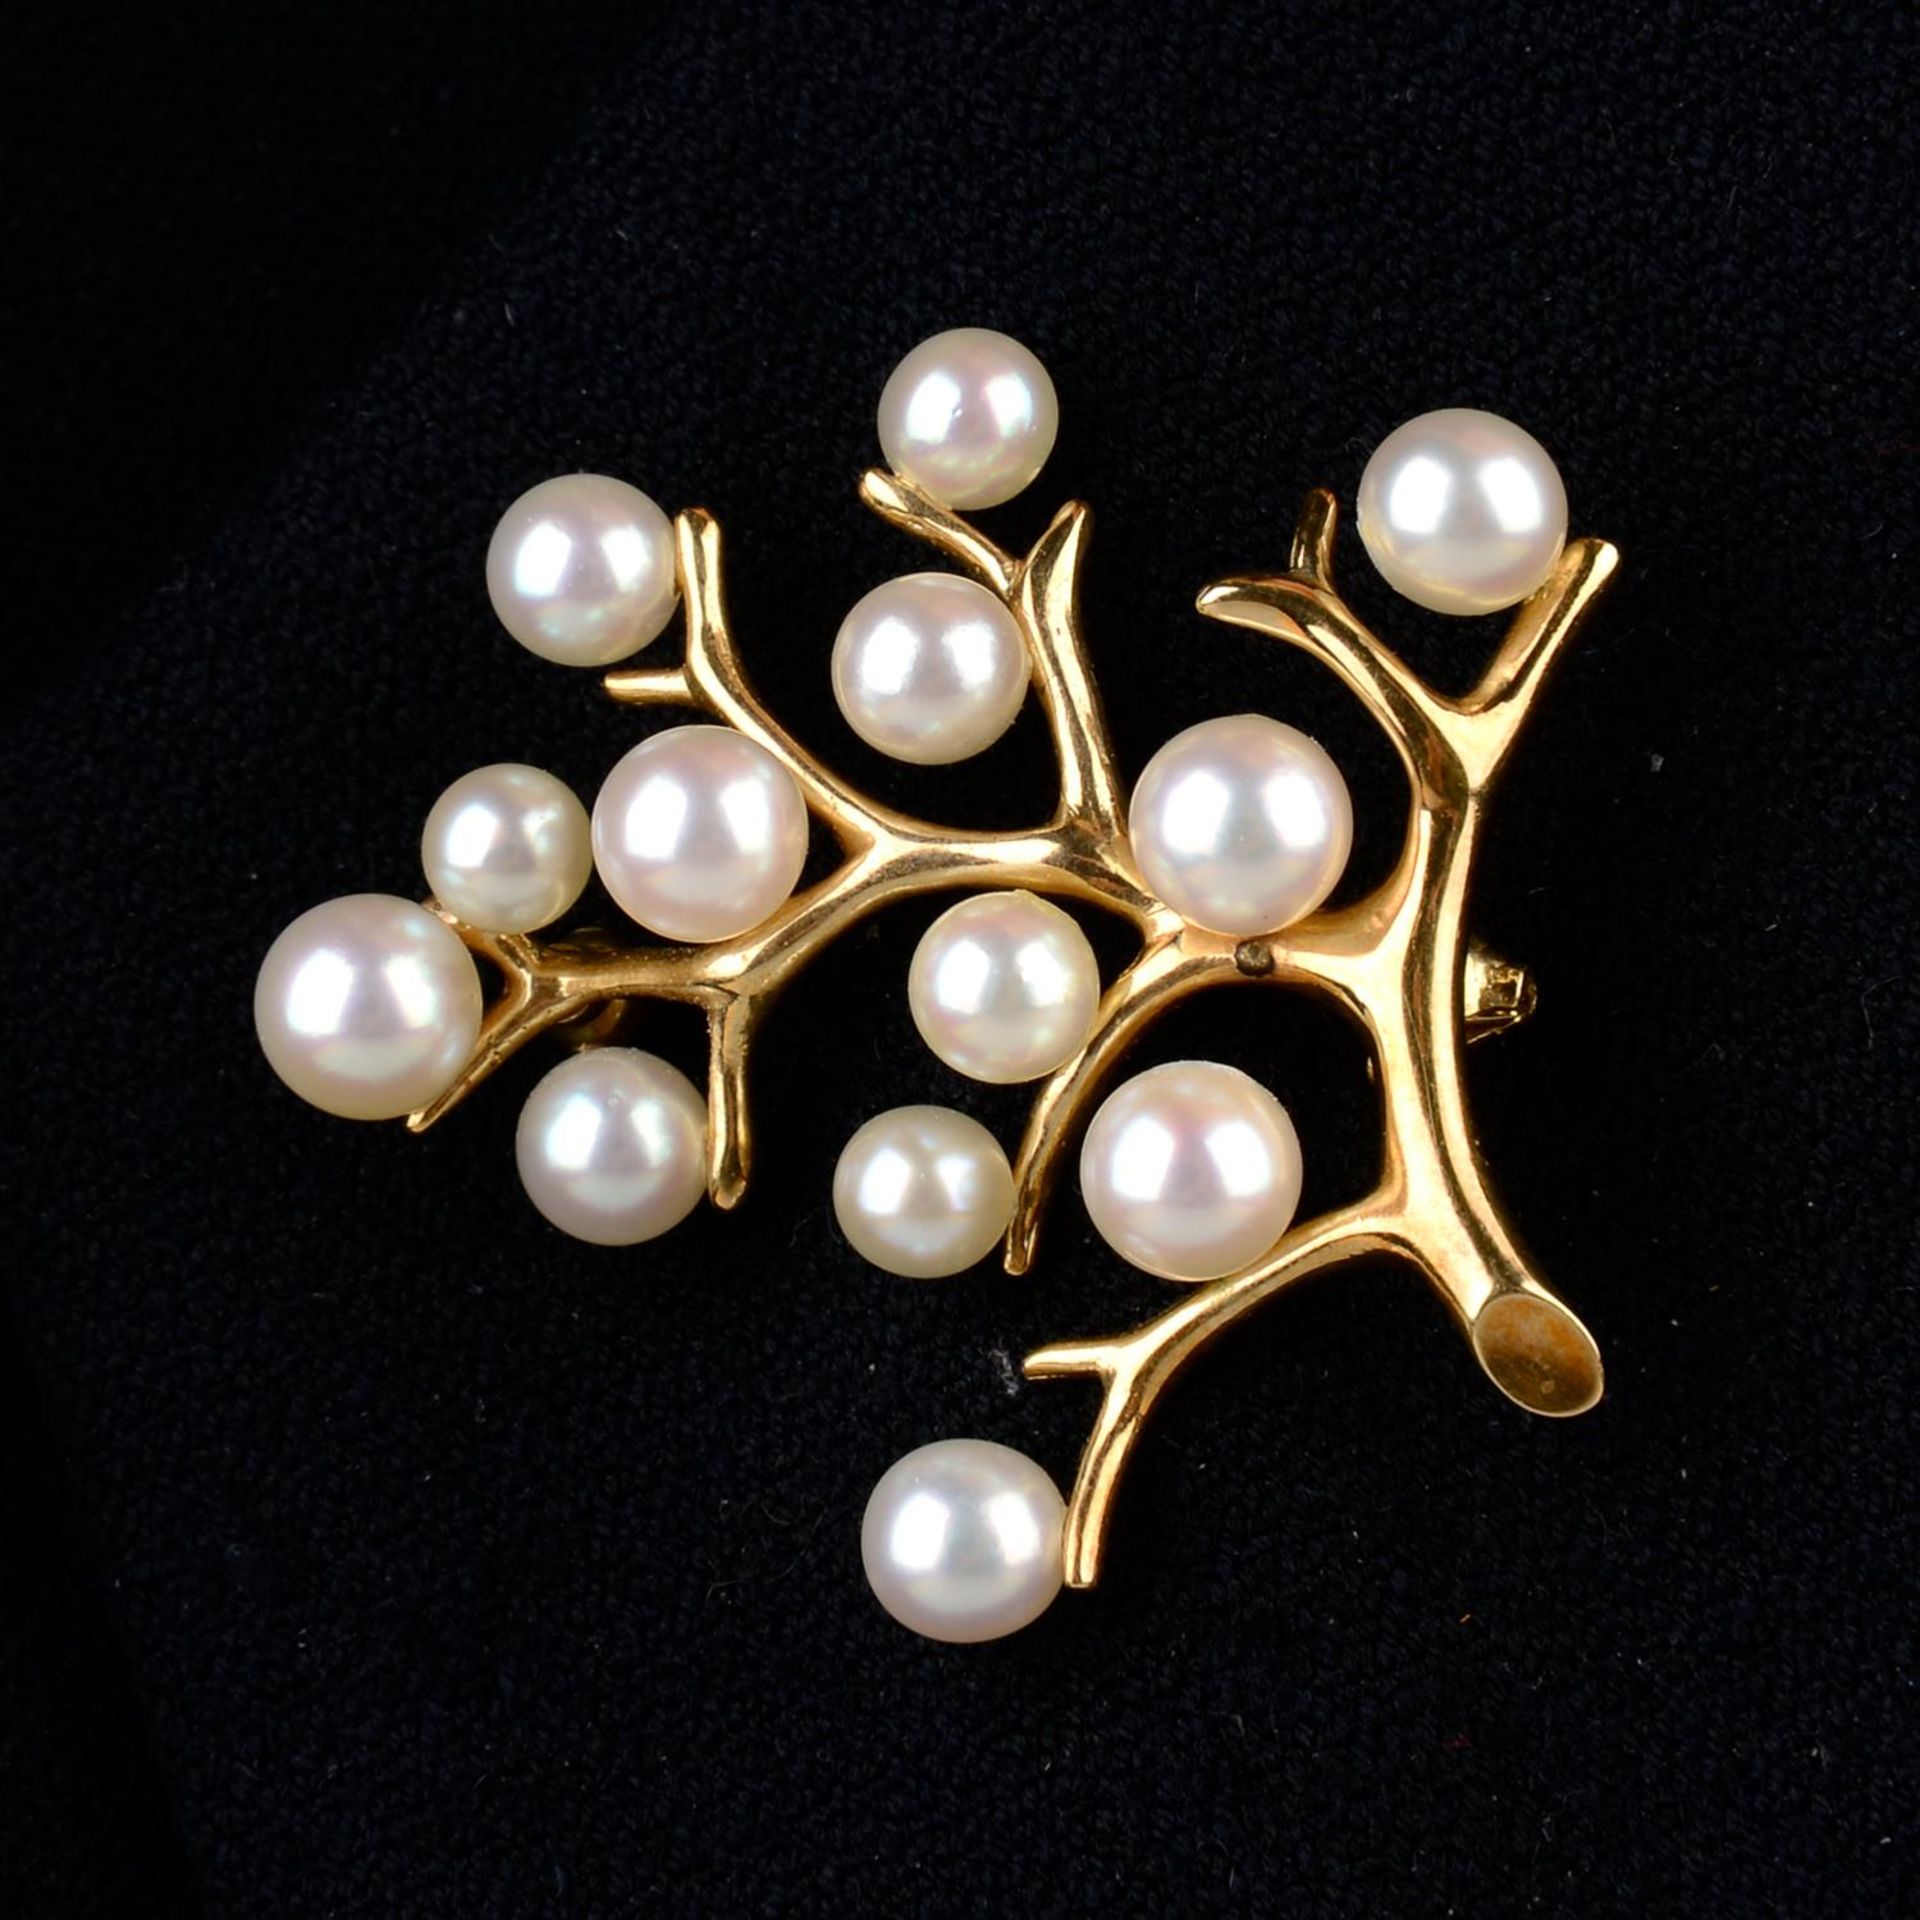 Cultured pearl 'Tree of Life' brooch, by Mikimoto